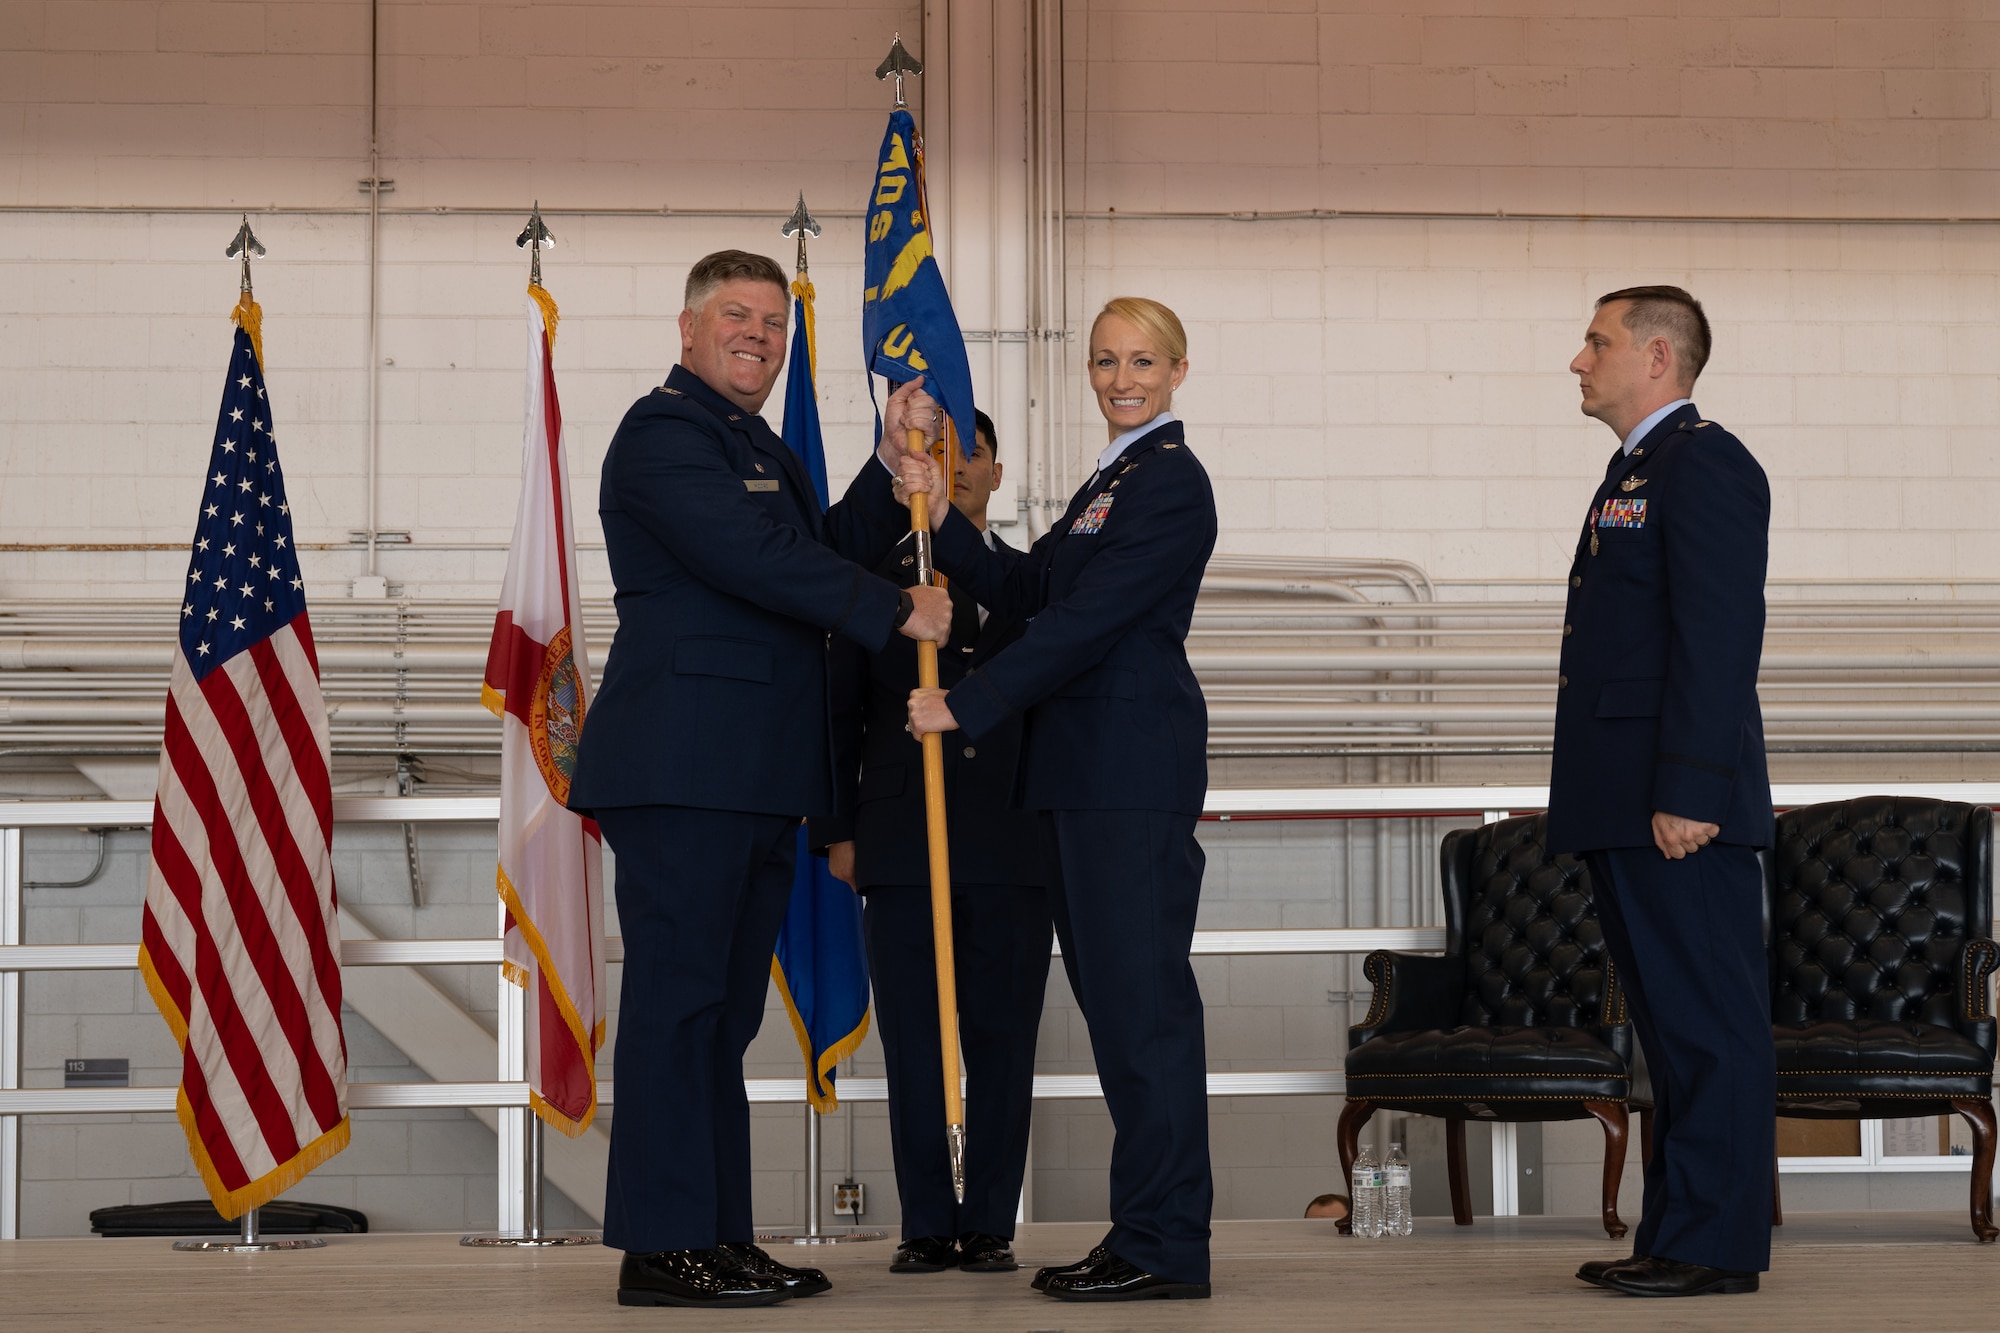 U.S. Air Force Col. Adam E. Moore, the 1st Special Operations Group commander, left, presents the guidon to Lt. Col Caitlin Reilly, the 319th Special Operations Squadrons commander, during the 319th SOS change of command and reassignment ceremony at Hurlburt Field, Florida, May 3, 2024. The reassignment of the 319th SOS from the 1st Special Operations Wing to the 492d Special Operations Wing will help Air Force Special Operations Command deploy and sustain power in support of the National Defense Strategy. (U.S. Air Force photo by Senior Airman Hussein Enaya)